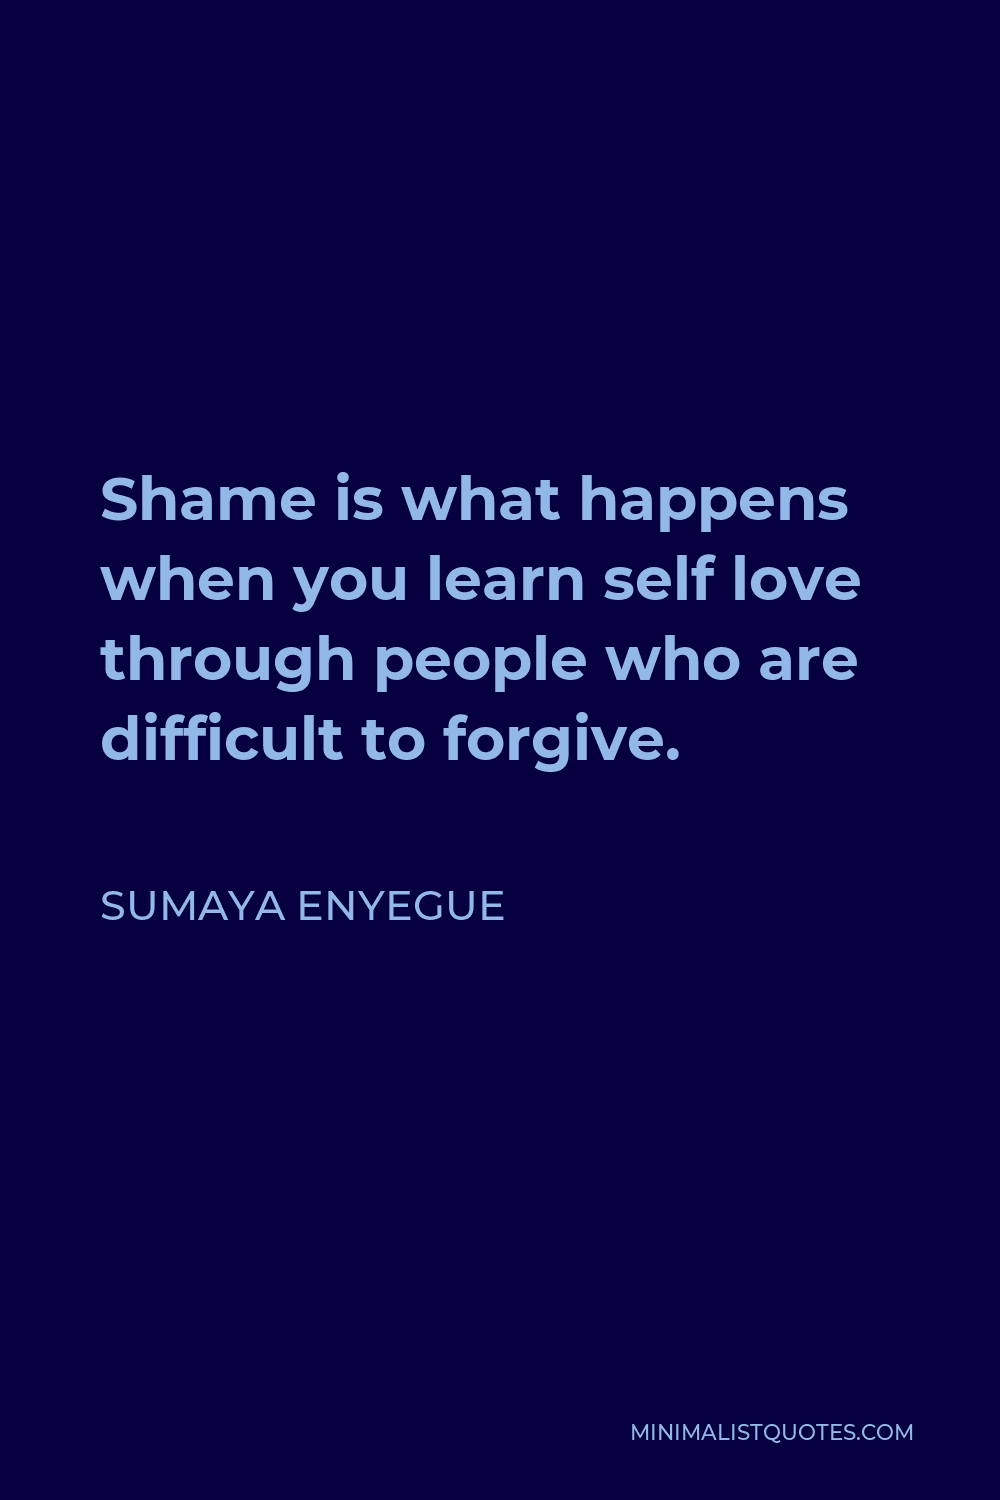 Sumaya Enyegue Quote - Shame is what happens when you learn self love through people who are difficult to forgive.